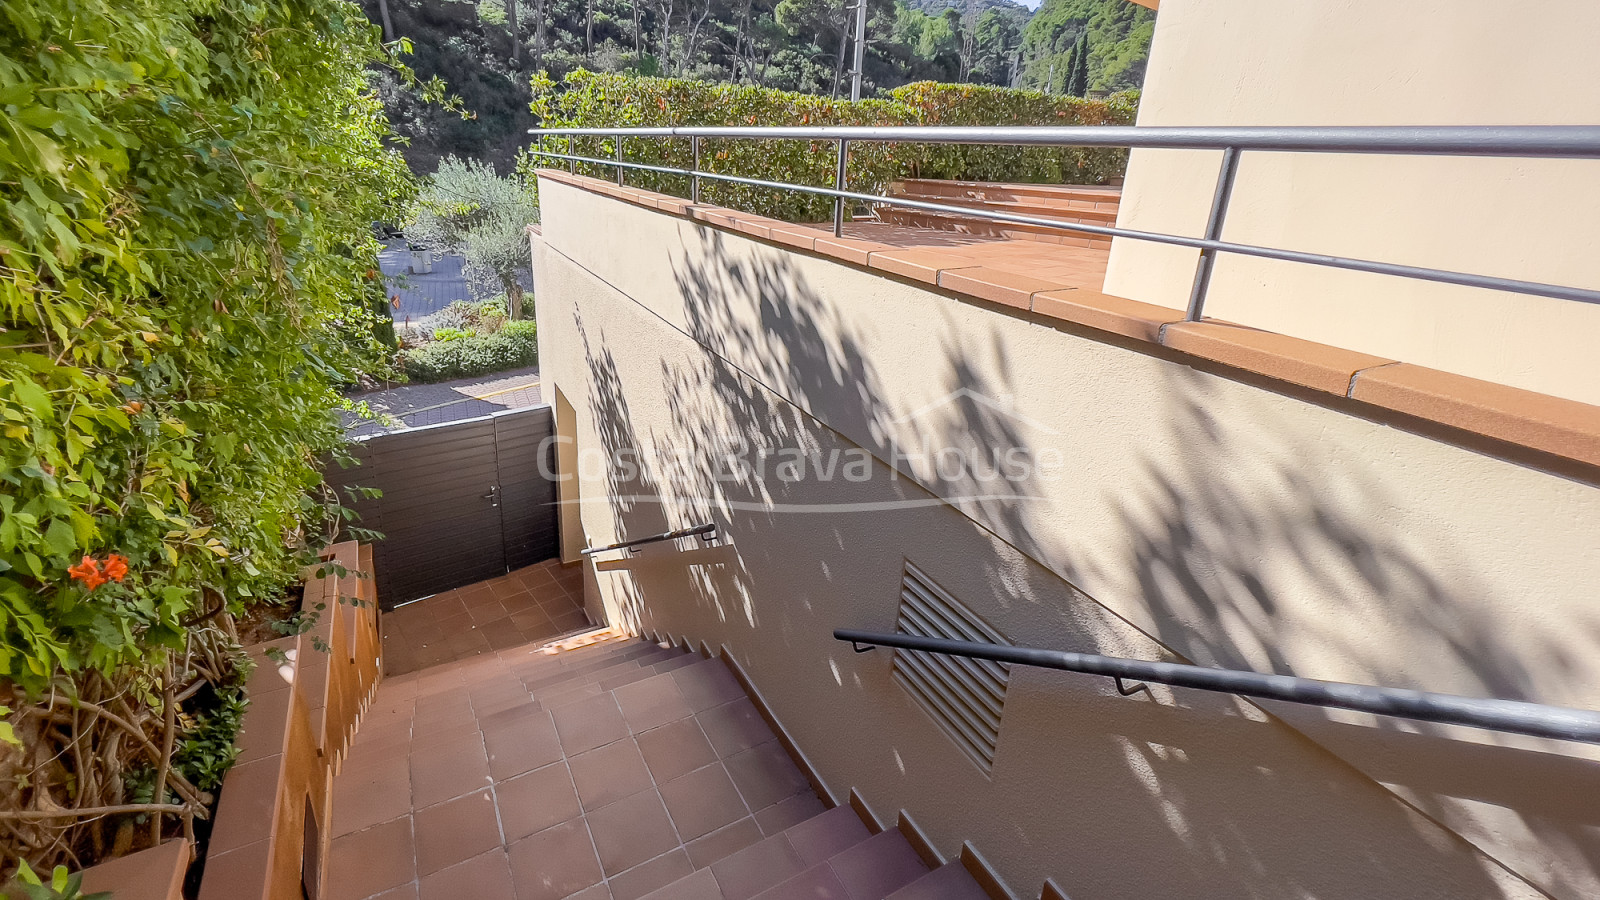 House with pool only 150 m from the beach in Sa Tuna cove, Begur